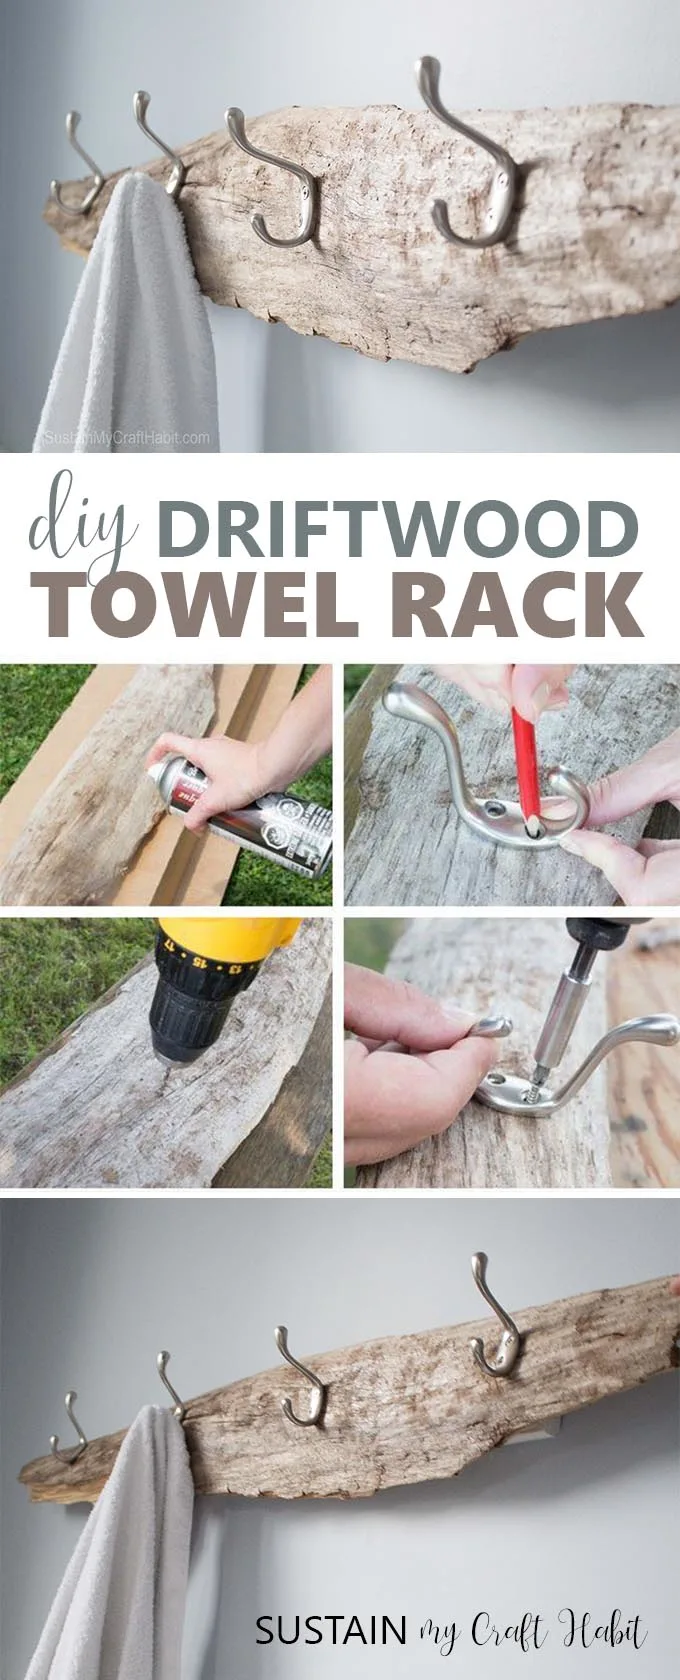 Rustic DIY towel rack made with driftwood